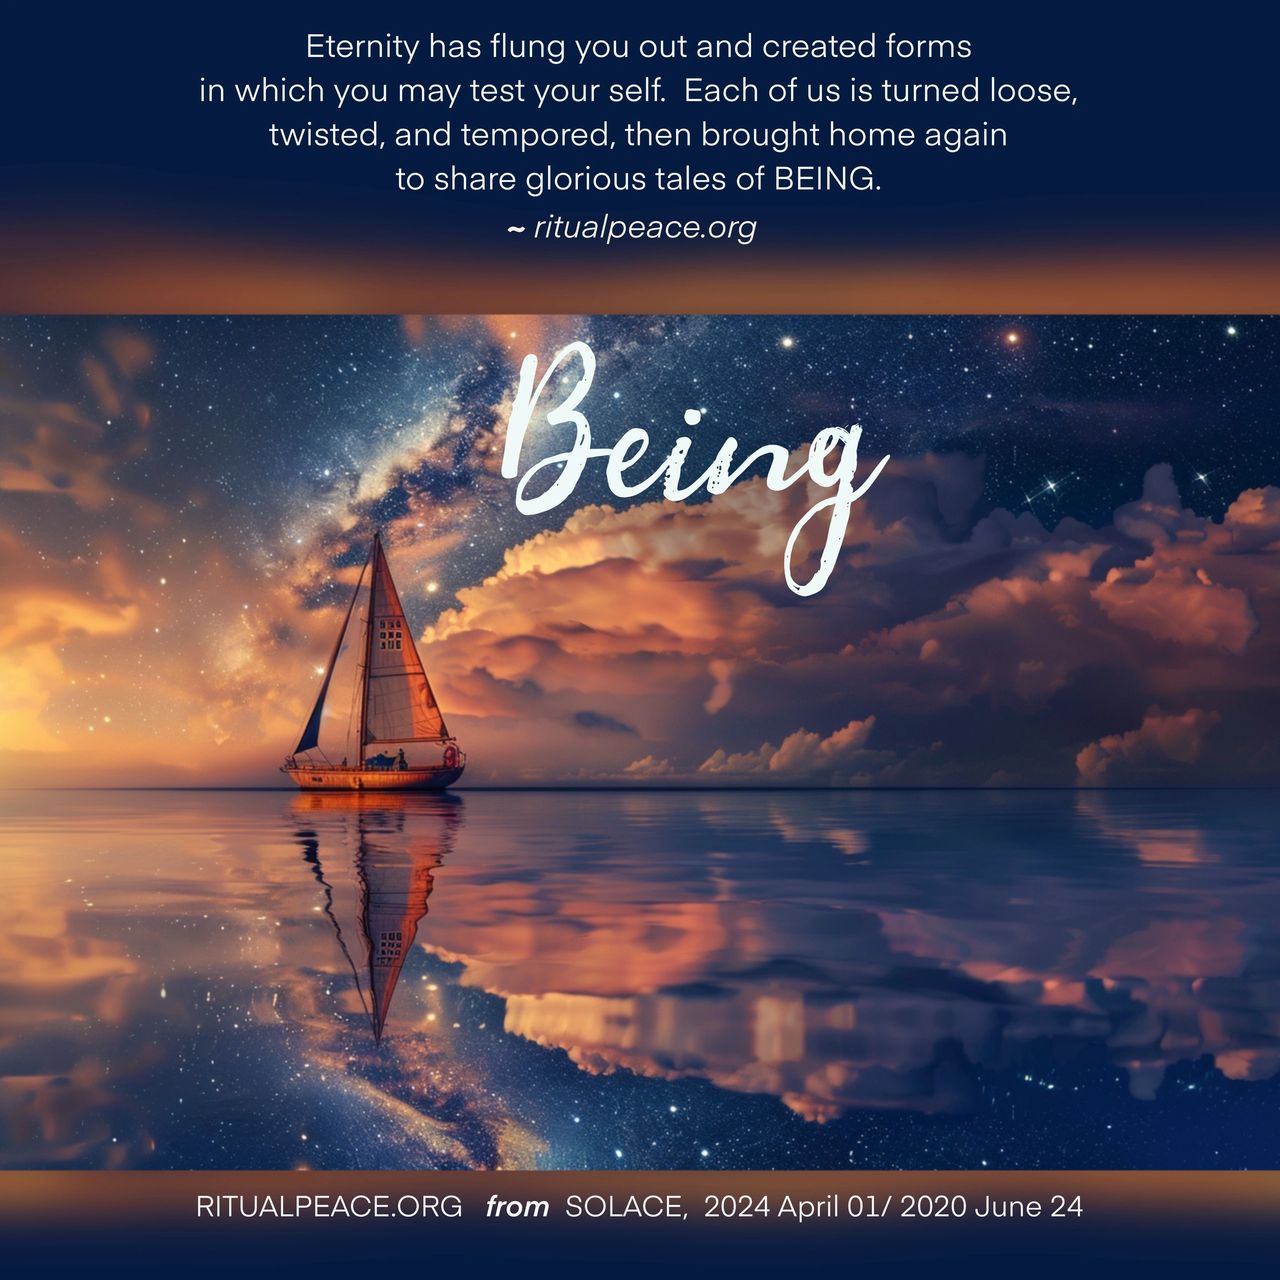 BEING, ETERNITY, EXISTENCE, INCARNATION, BOAT ON STILL WATER, CLOUDY SKY, SUNSET